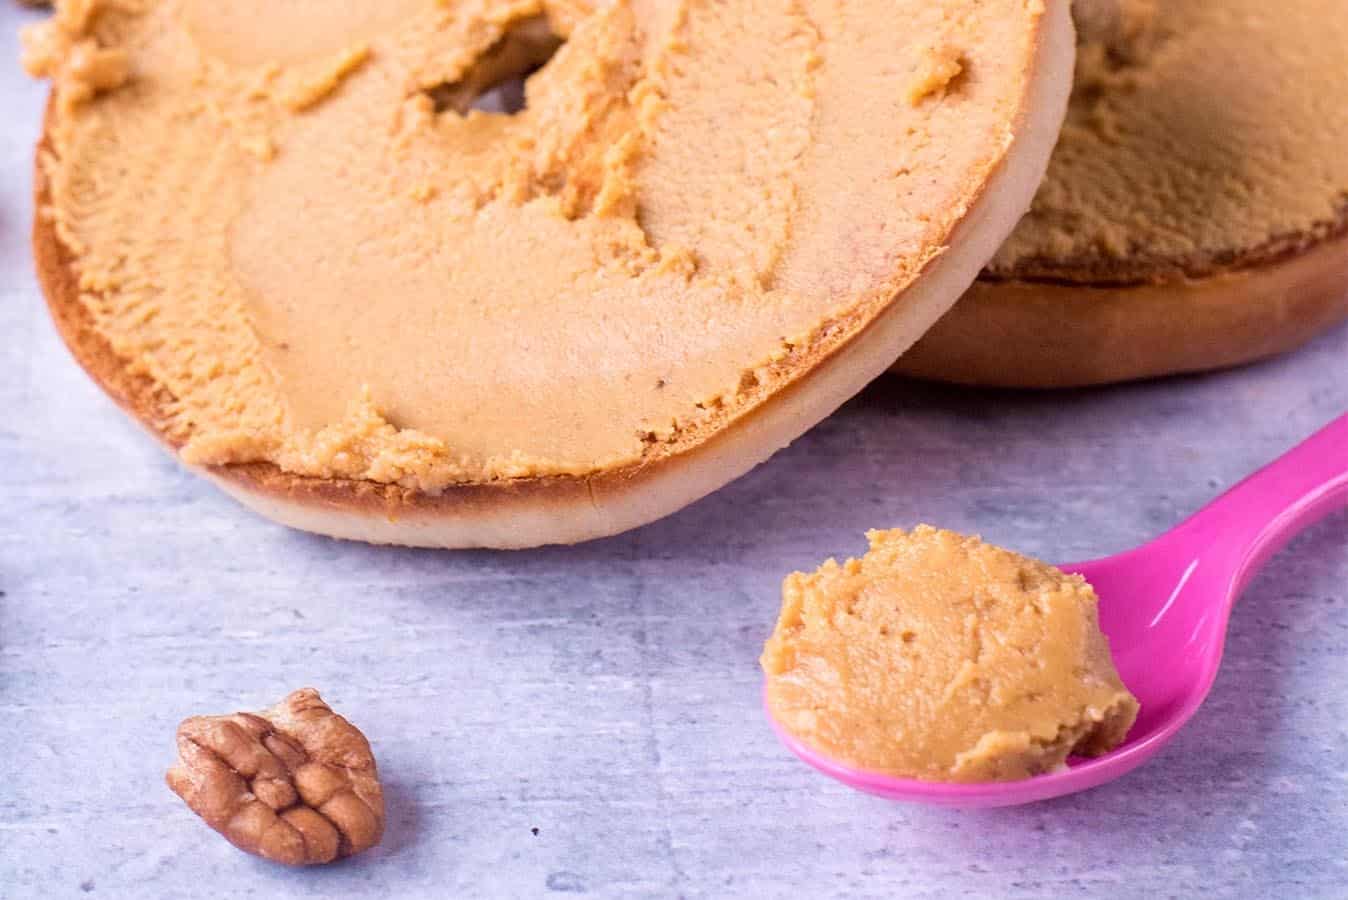 Pecan Butter spread on a bakel and some on a pink spoon.